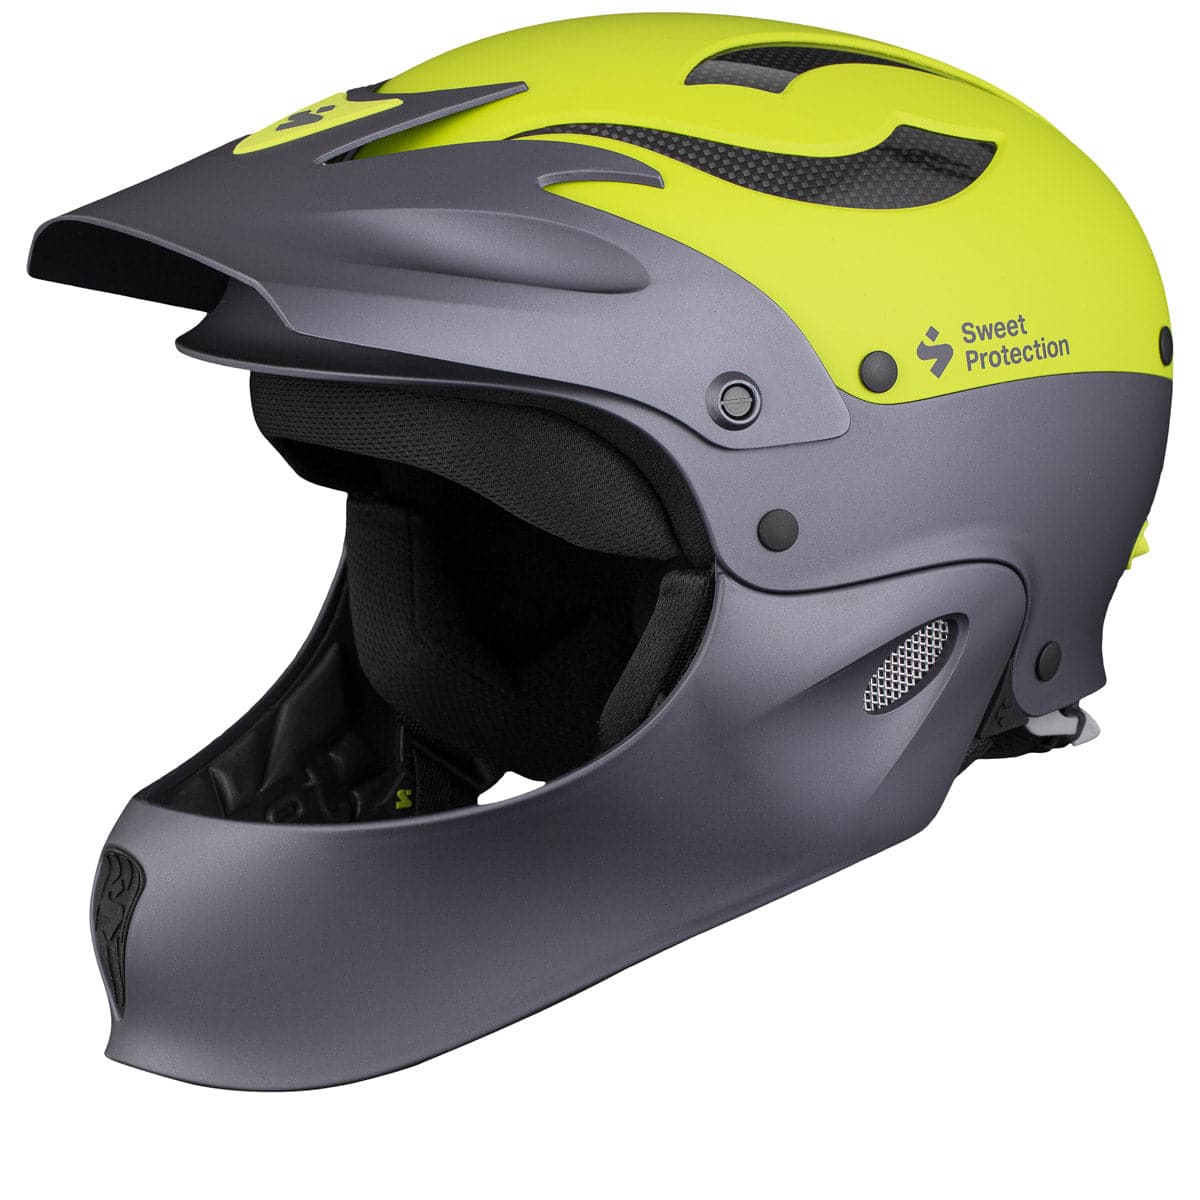 Featuring the Rocker Full Face Helmet helmet manufactured by Sweet shown here from a second angle.